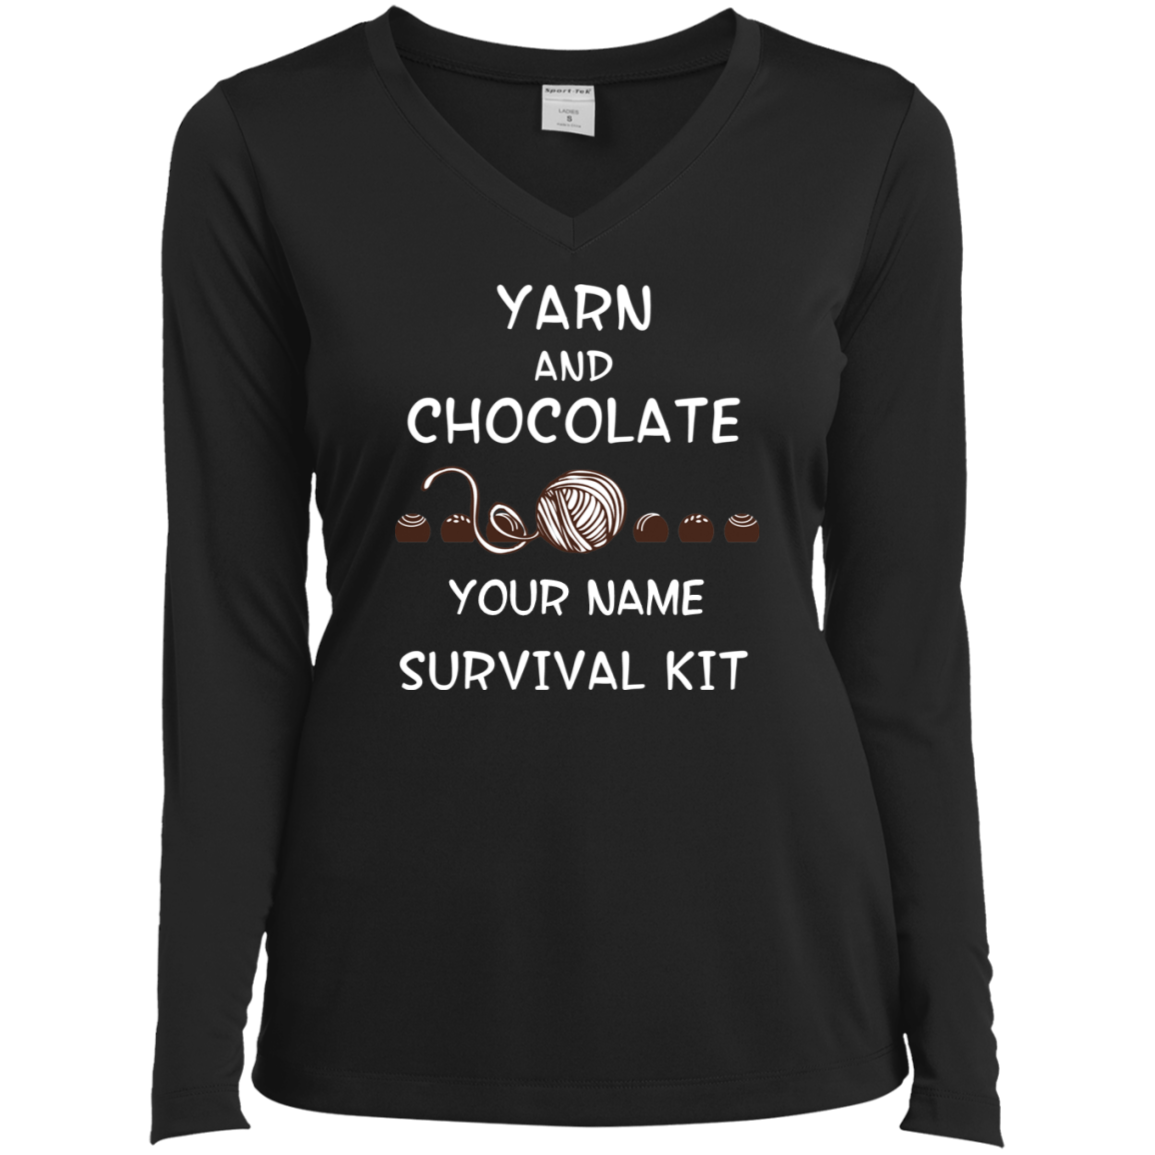 Yarn and Chocolate Survival Kit - Personalized Ladies Long Sleeve Shirts